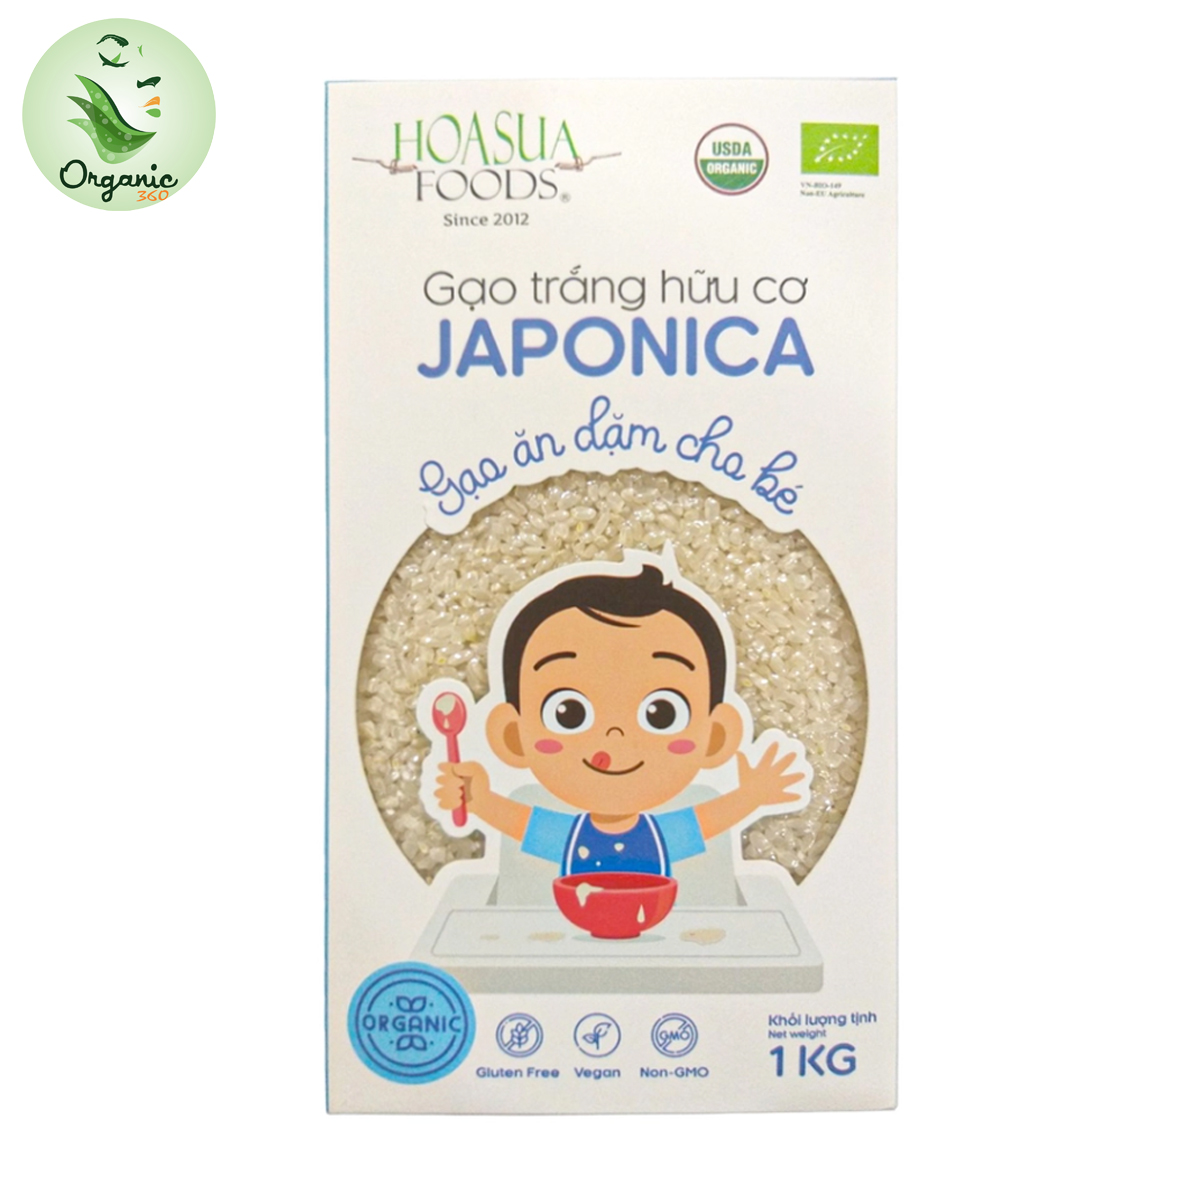 Japonica Hoa Sua organic white rice 1kg for baby food